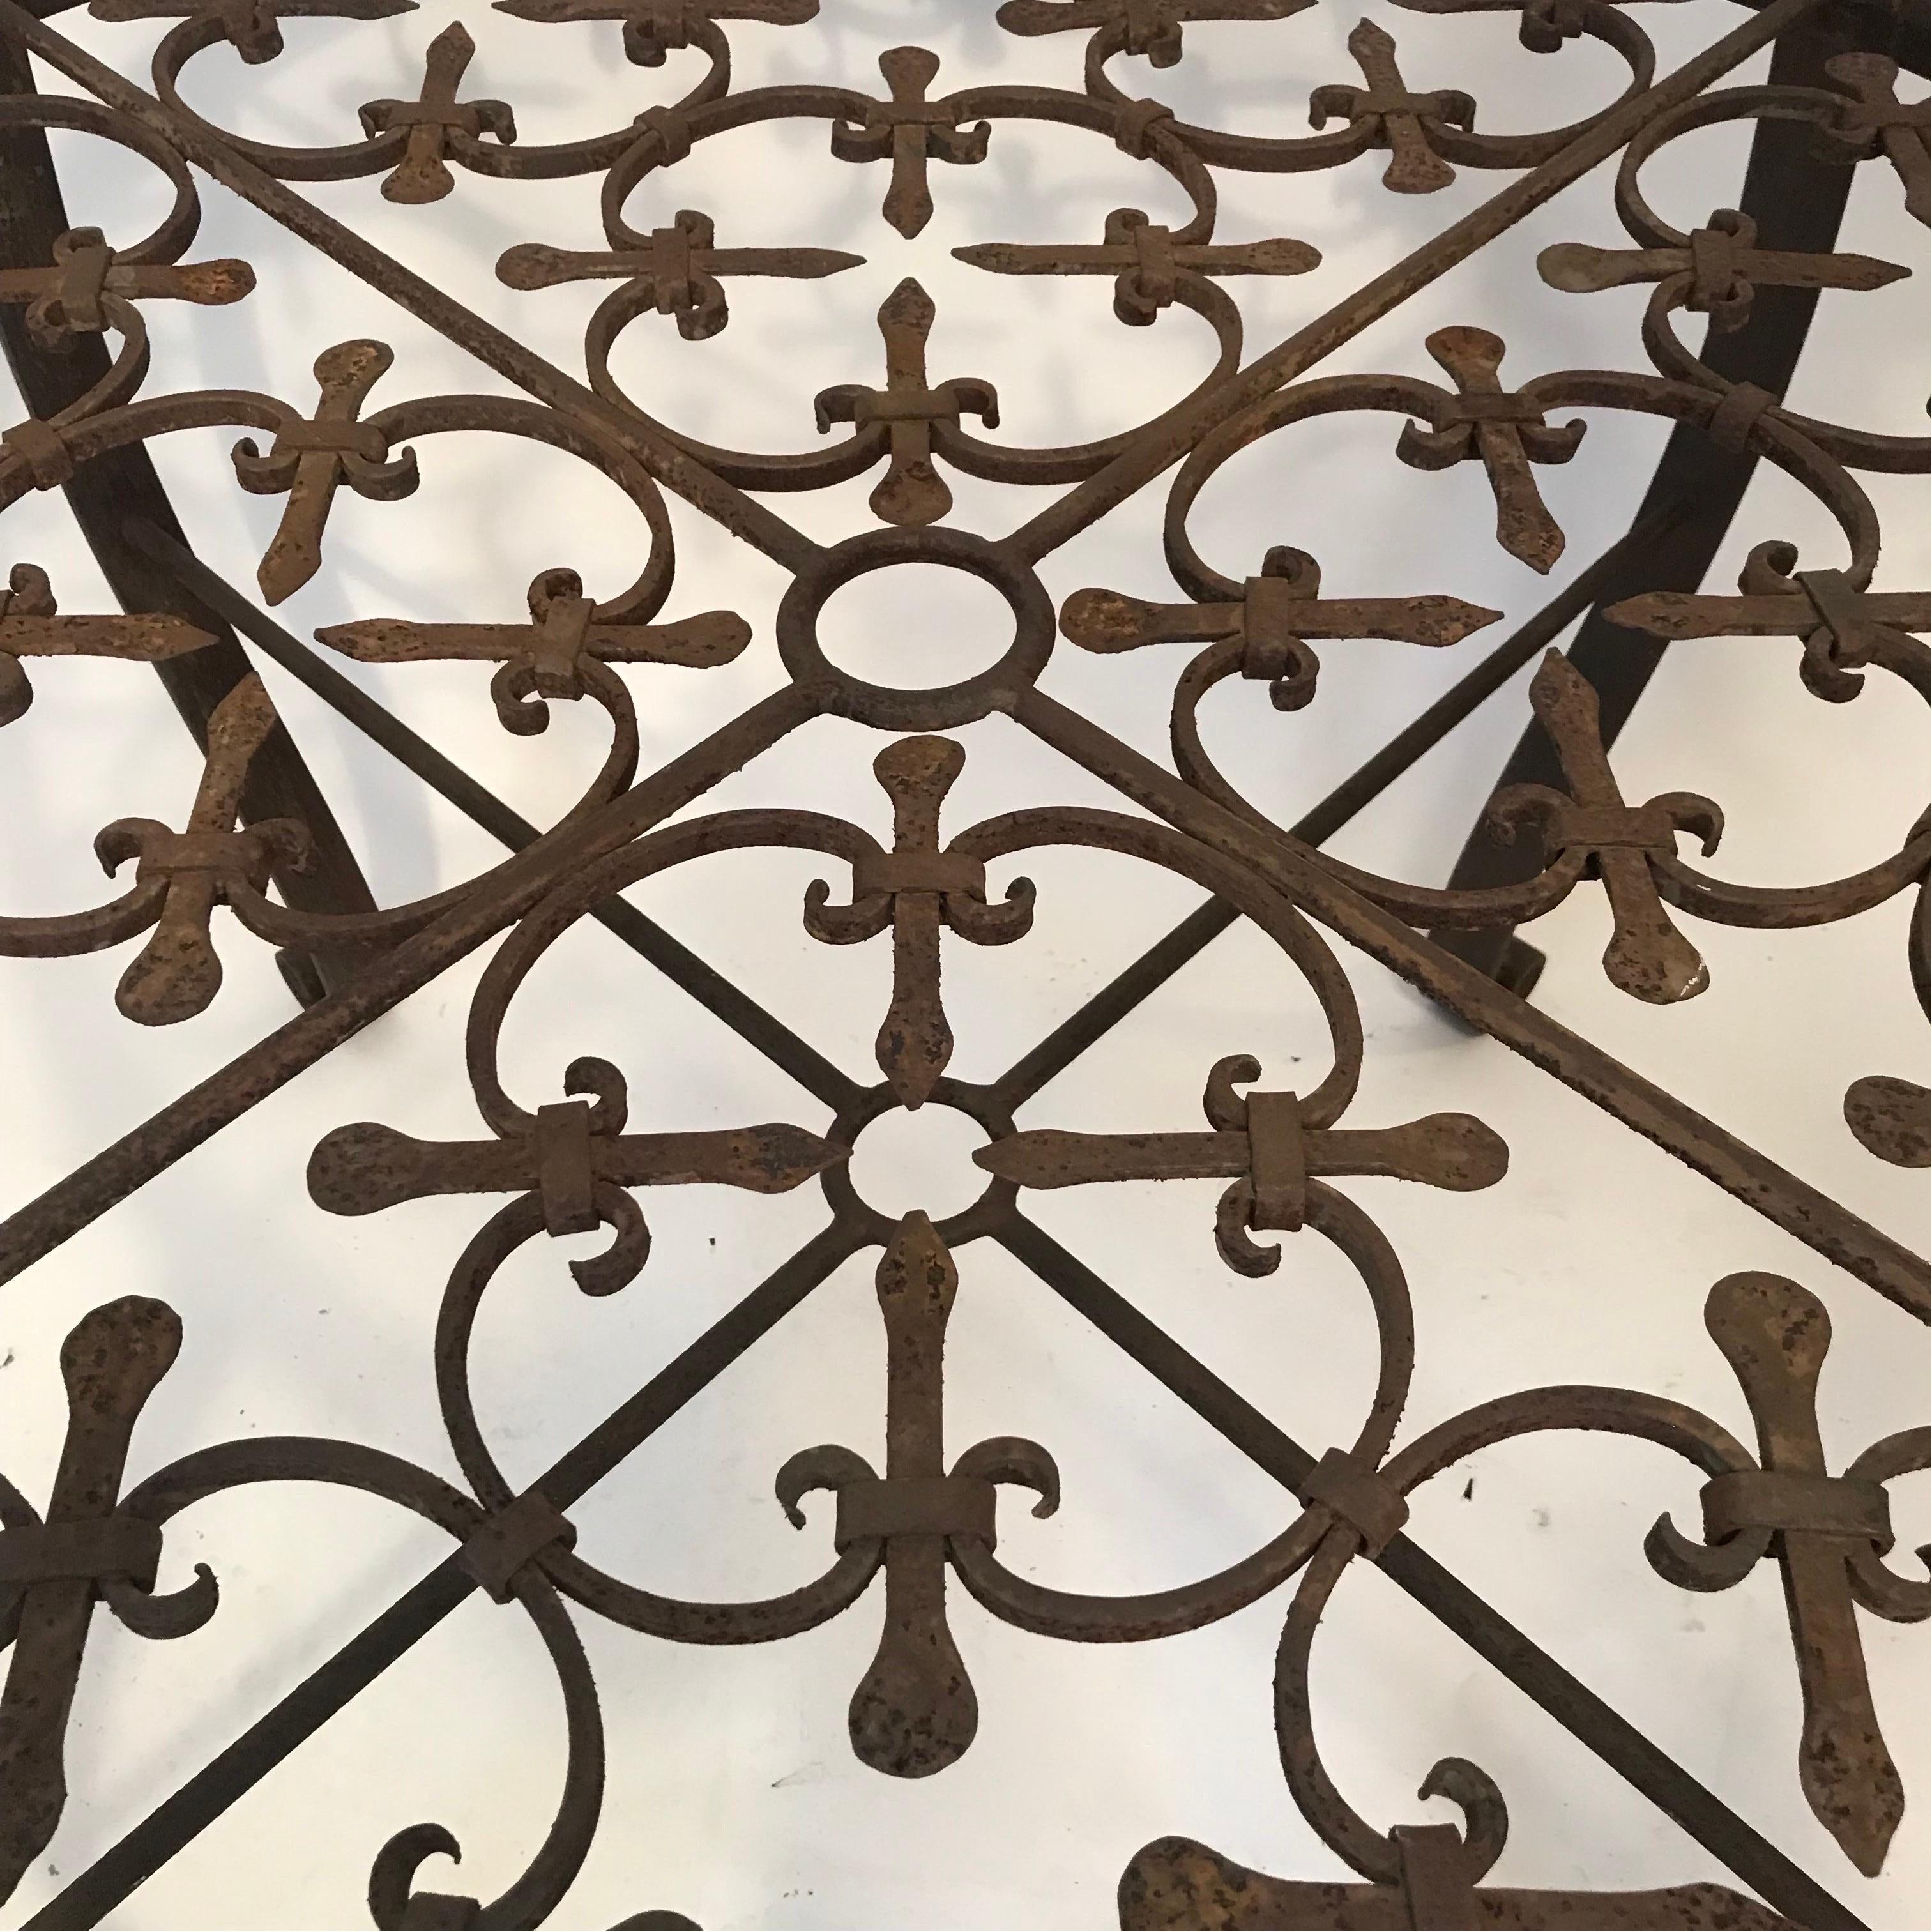 A 20th Century French Gate Repurposed into a Contemporary Iron Garden Table  3